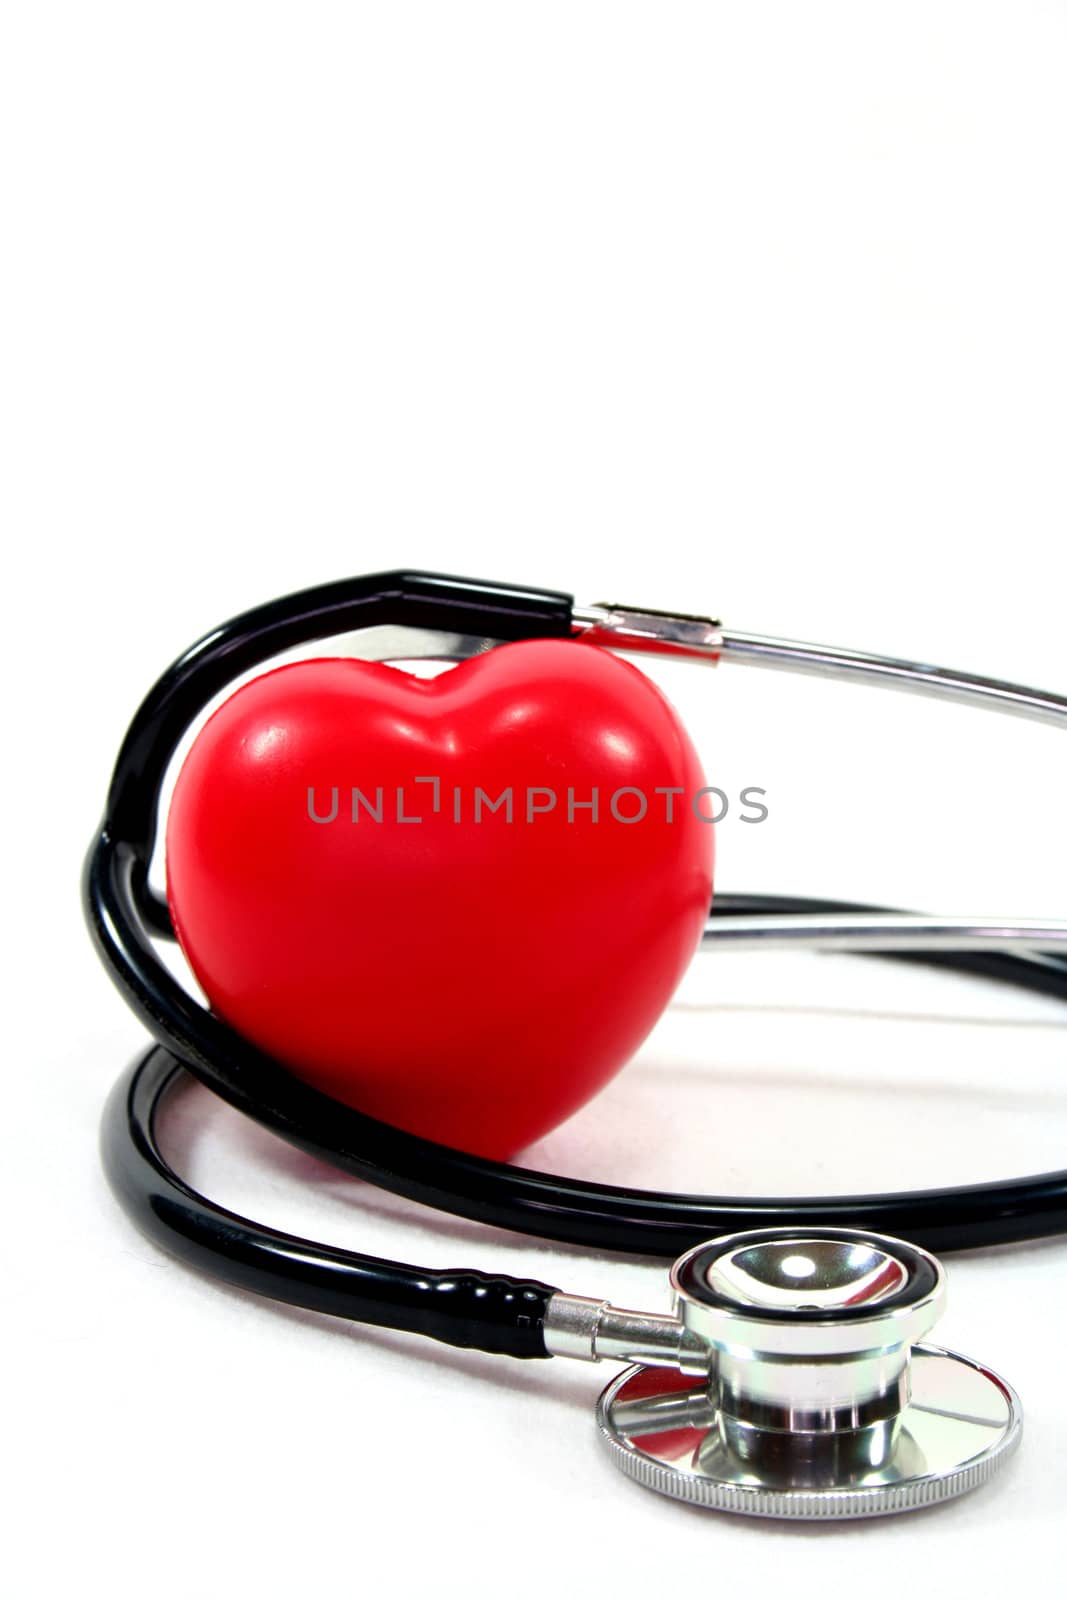 Stethoscope with red heart on a white background